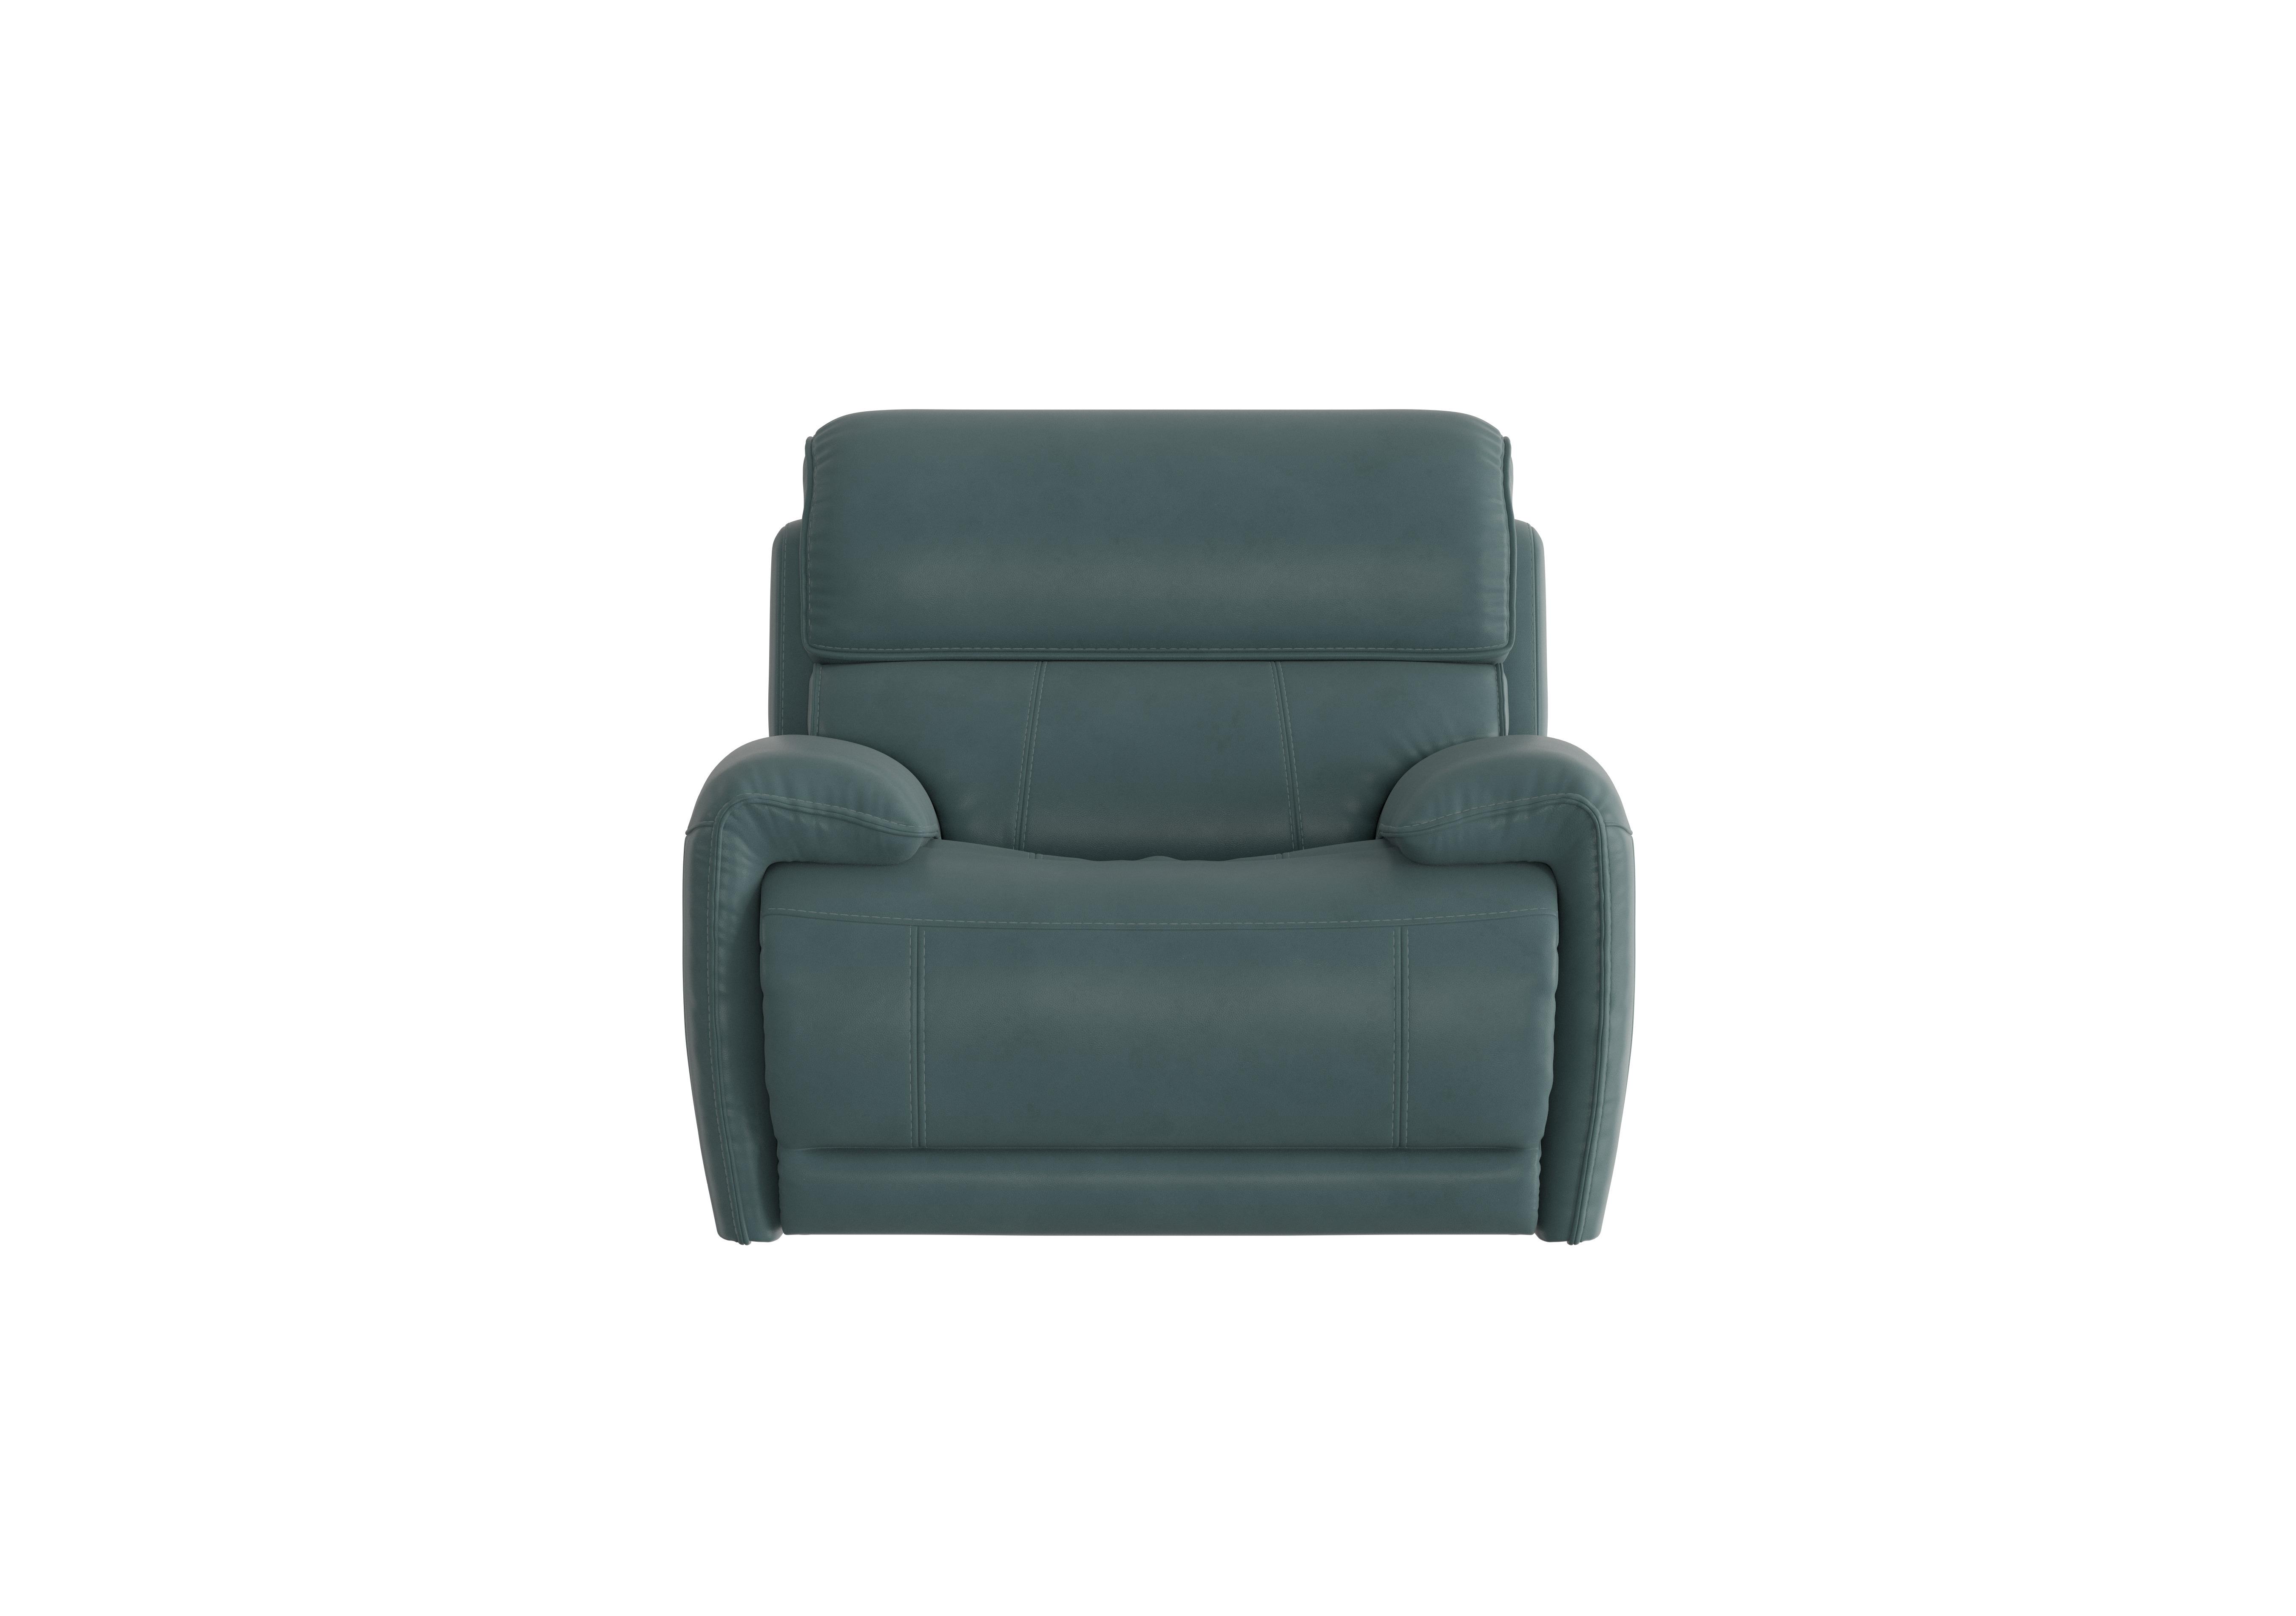 Link Leather Power Recliner Armchair with Power Headrest in Bv-301e Lake Green on Furniture Village